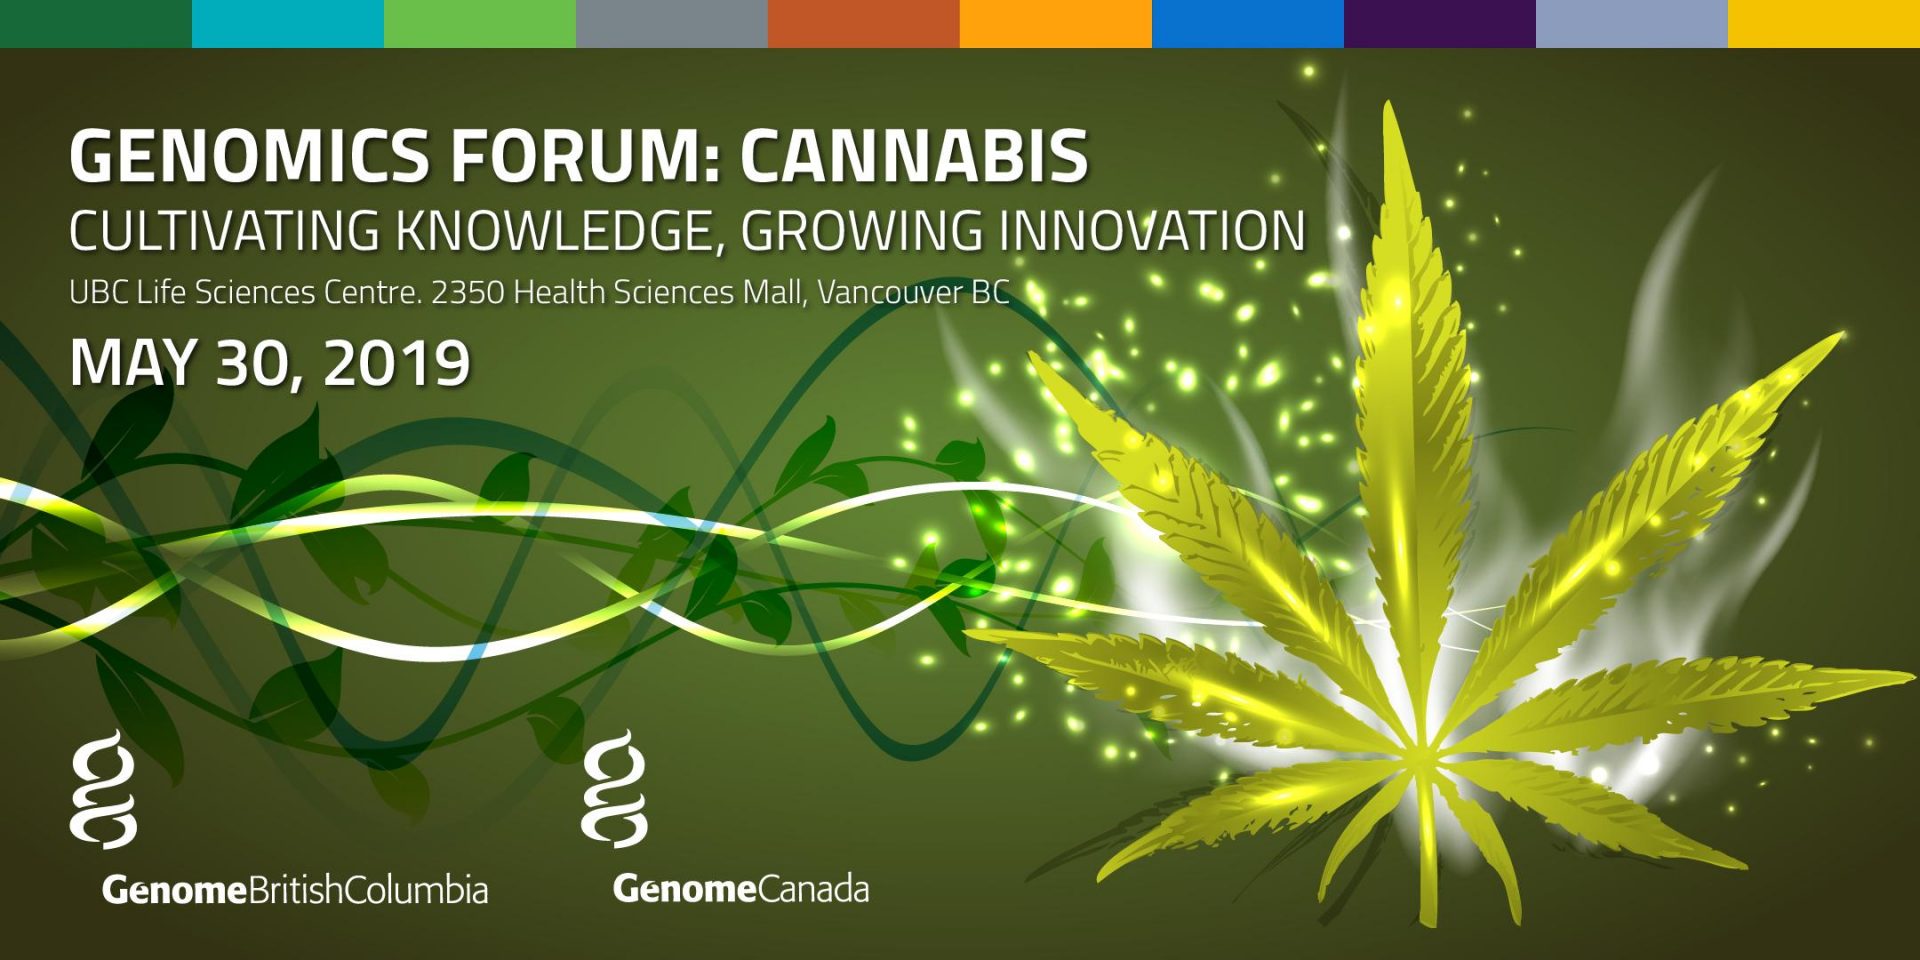 Genomics Forum “Cannabis - Cultivating Knowledge, Growing Innovation”